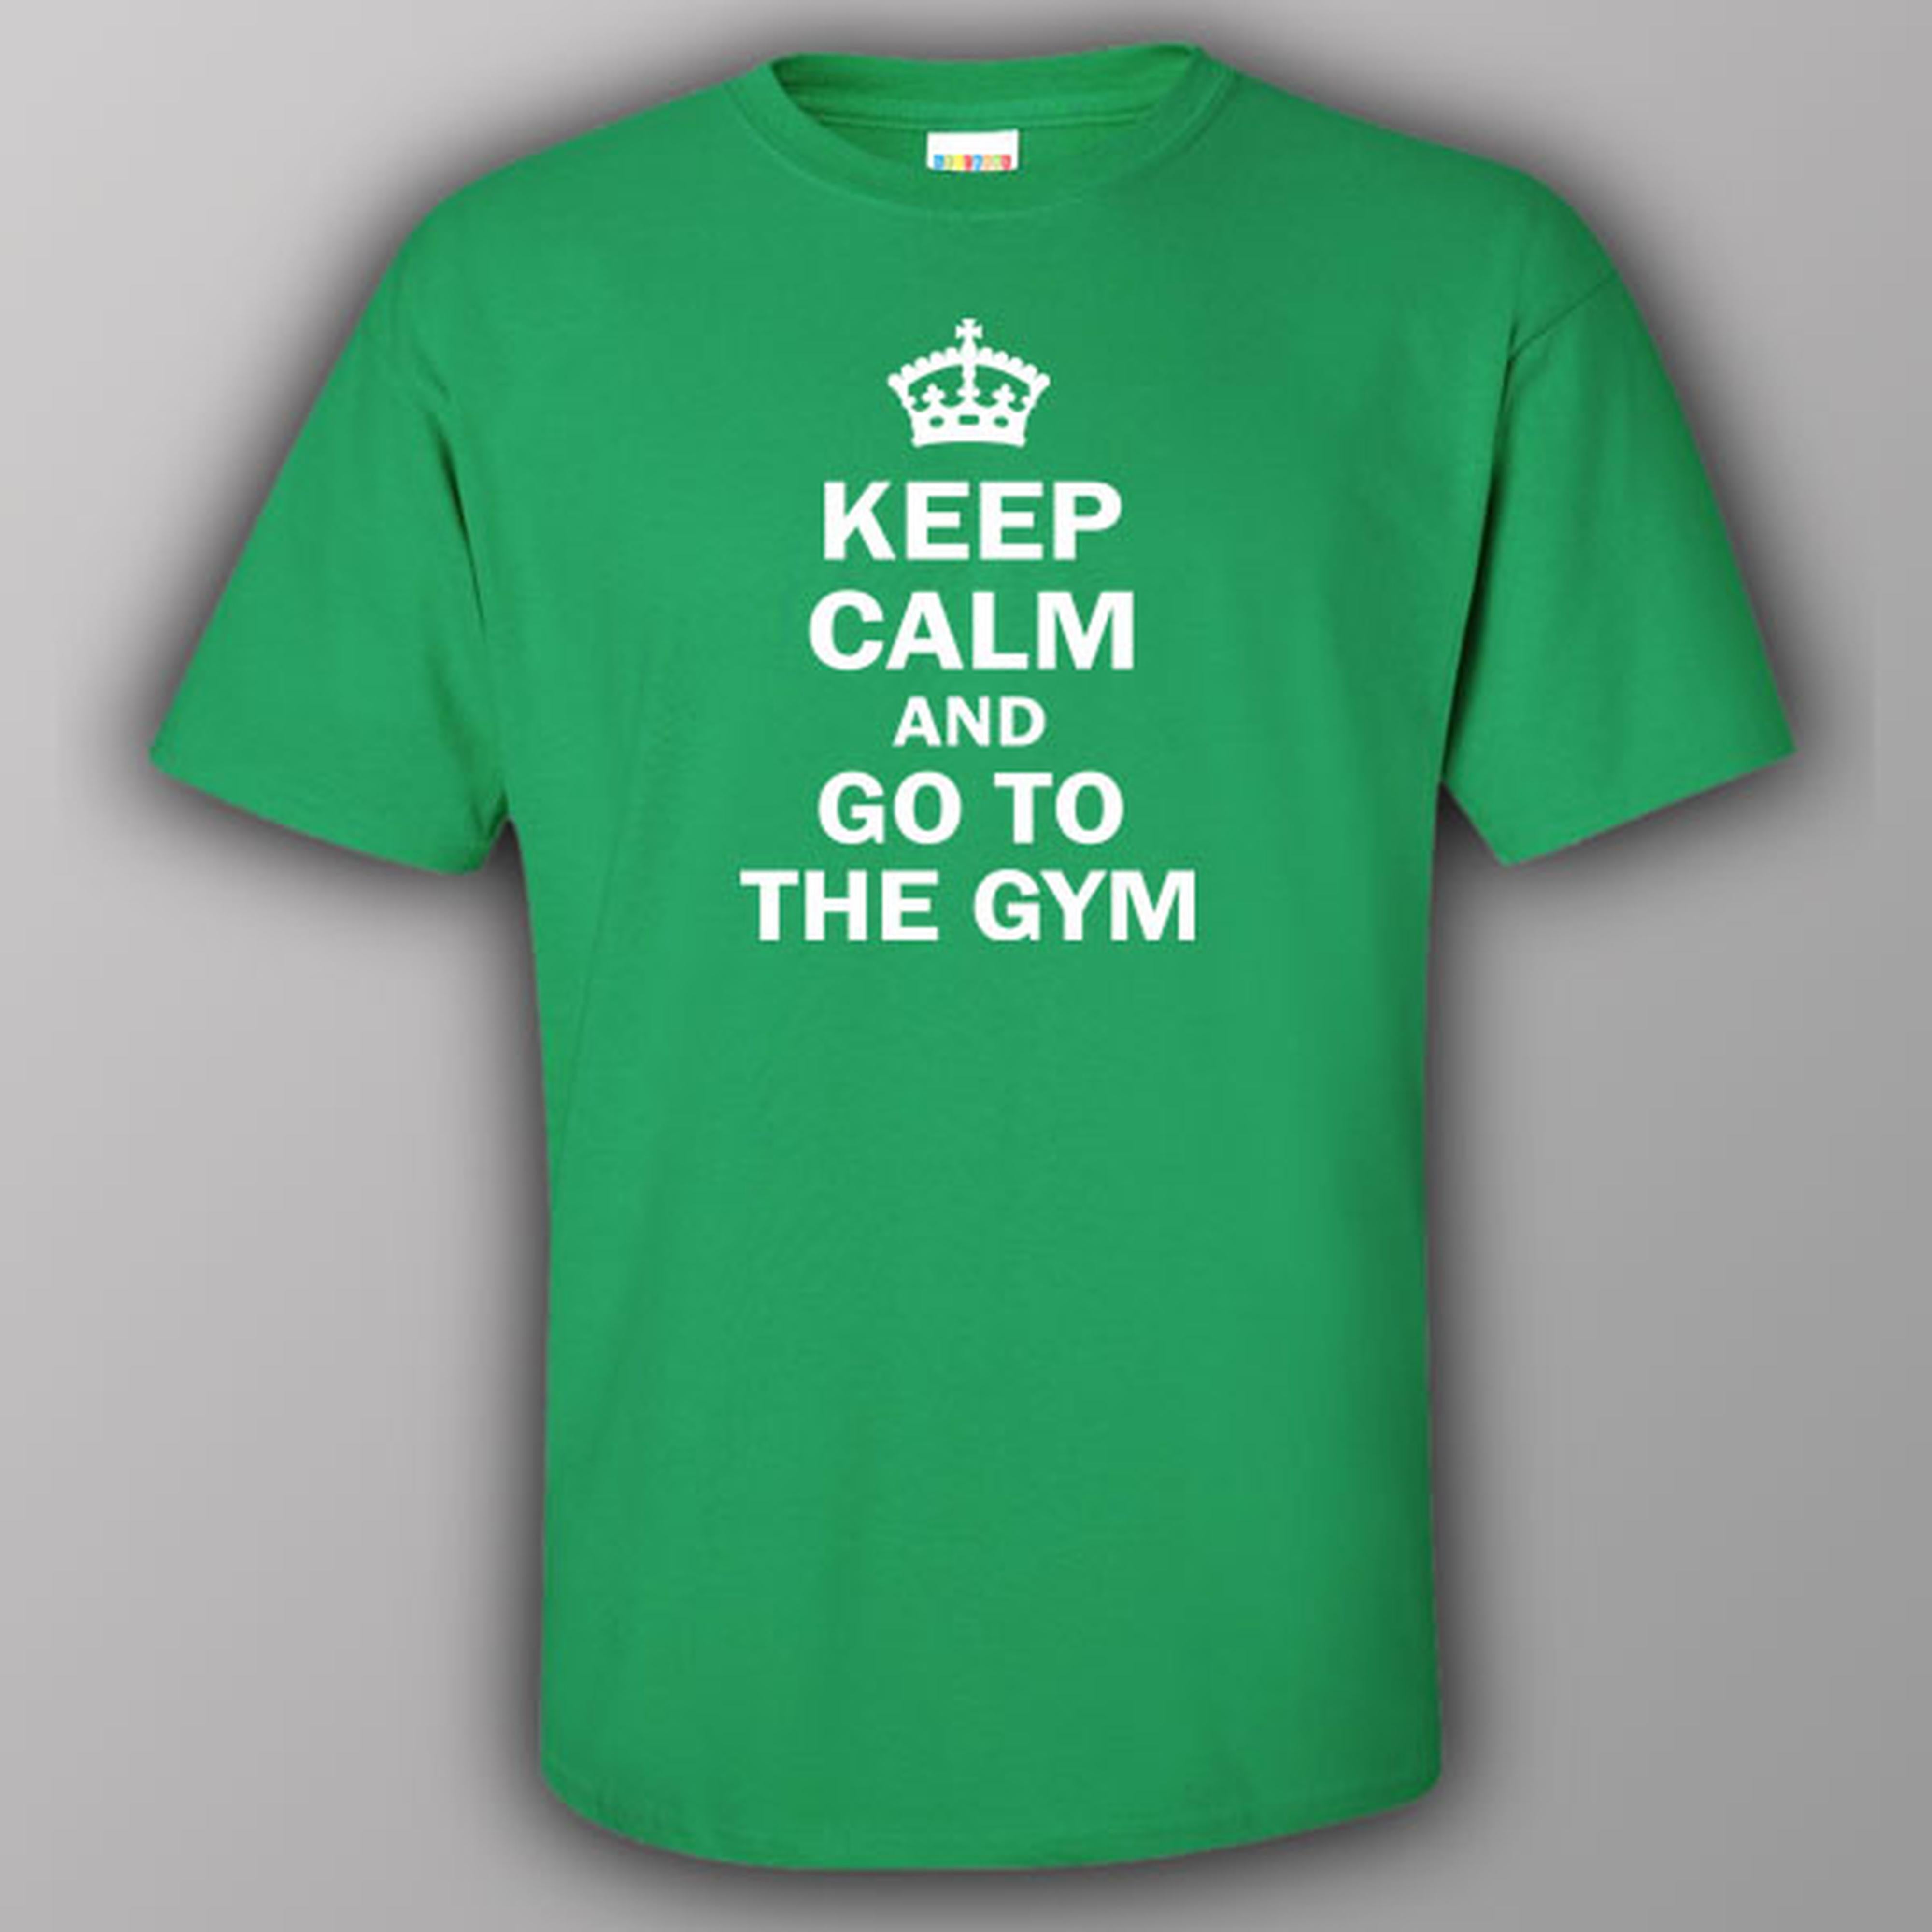 Keep calm and go to the gym - T-shirt